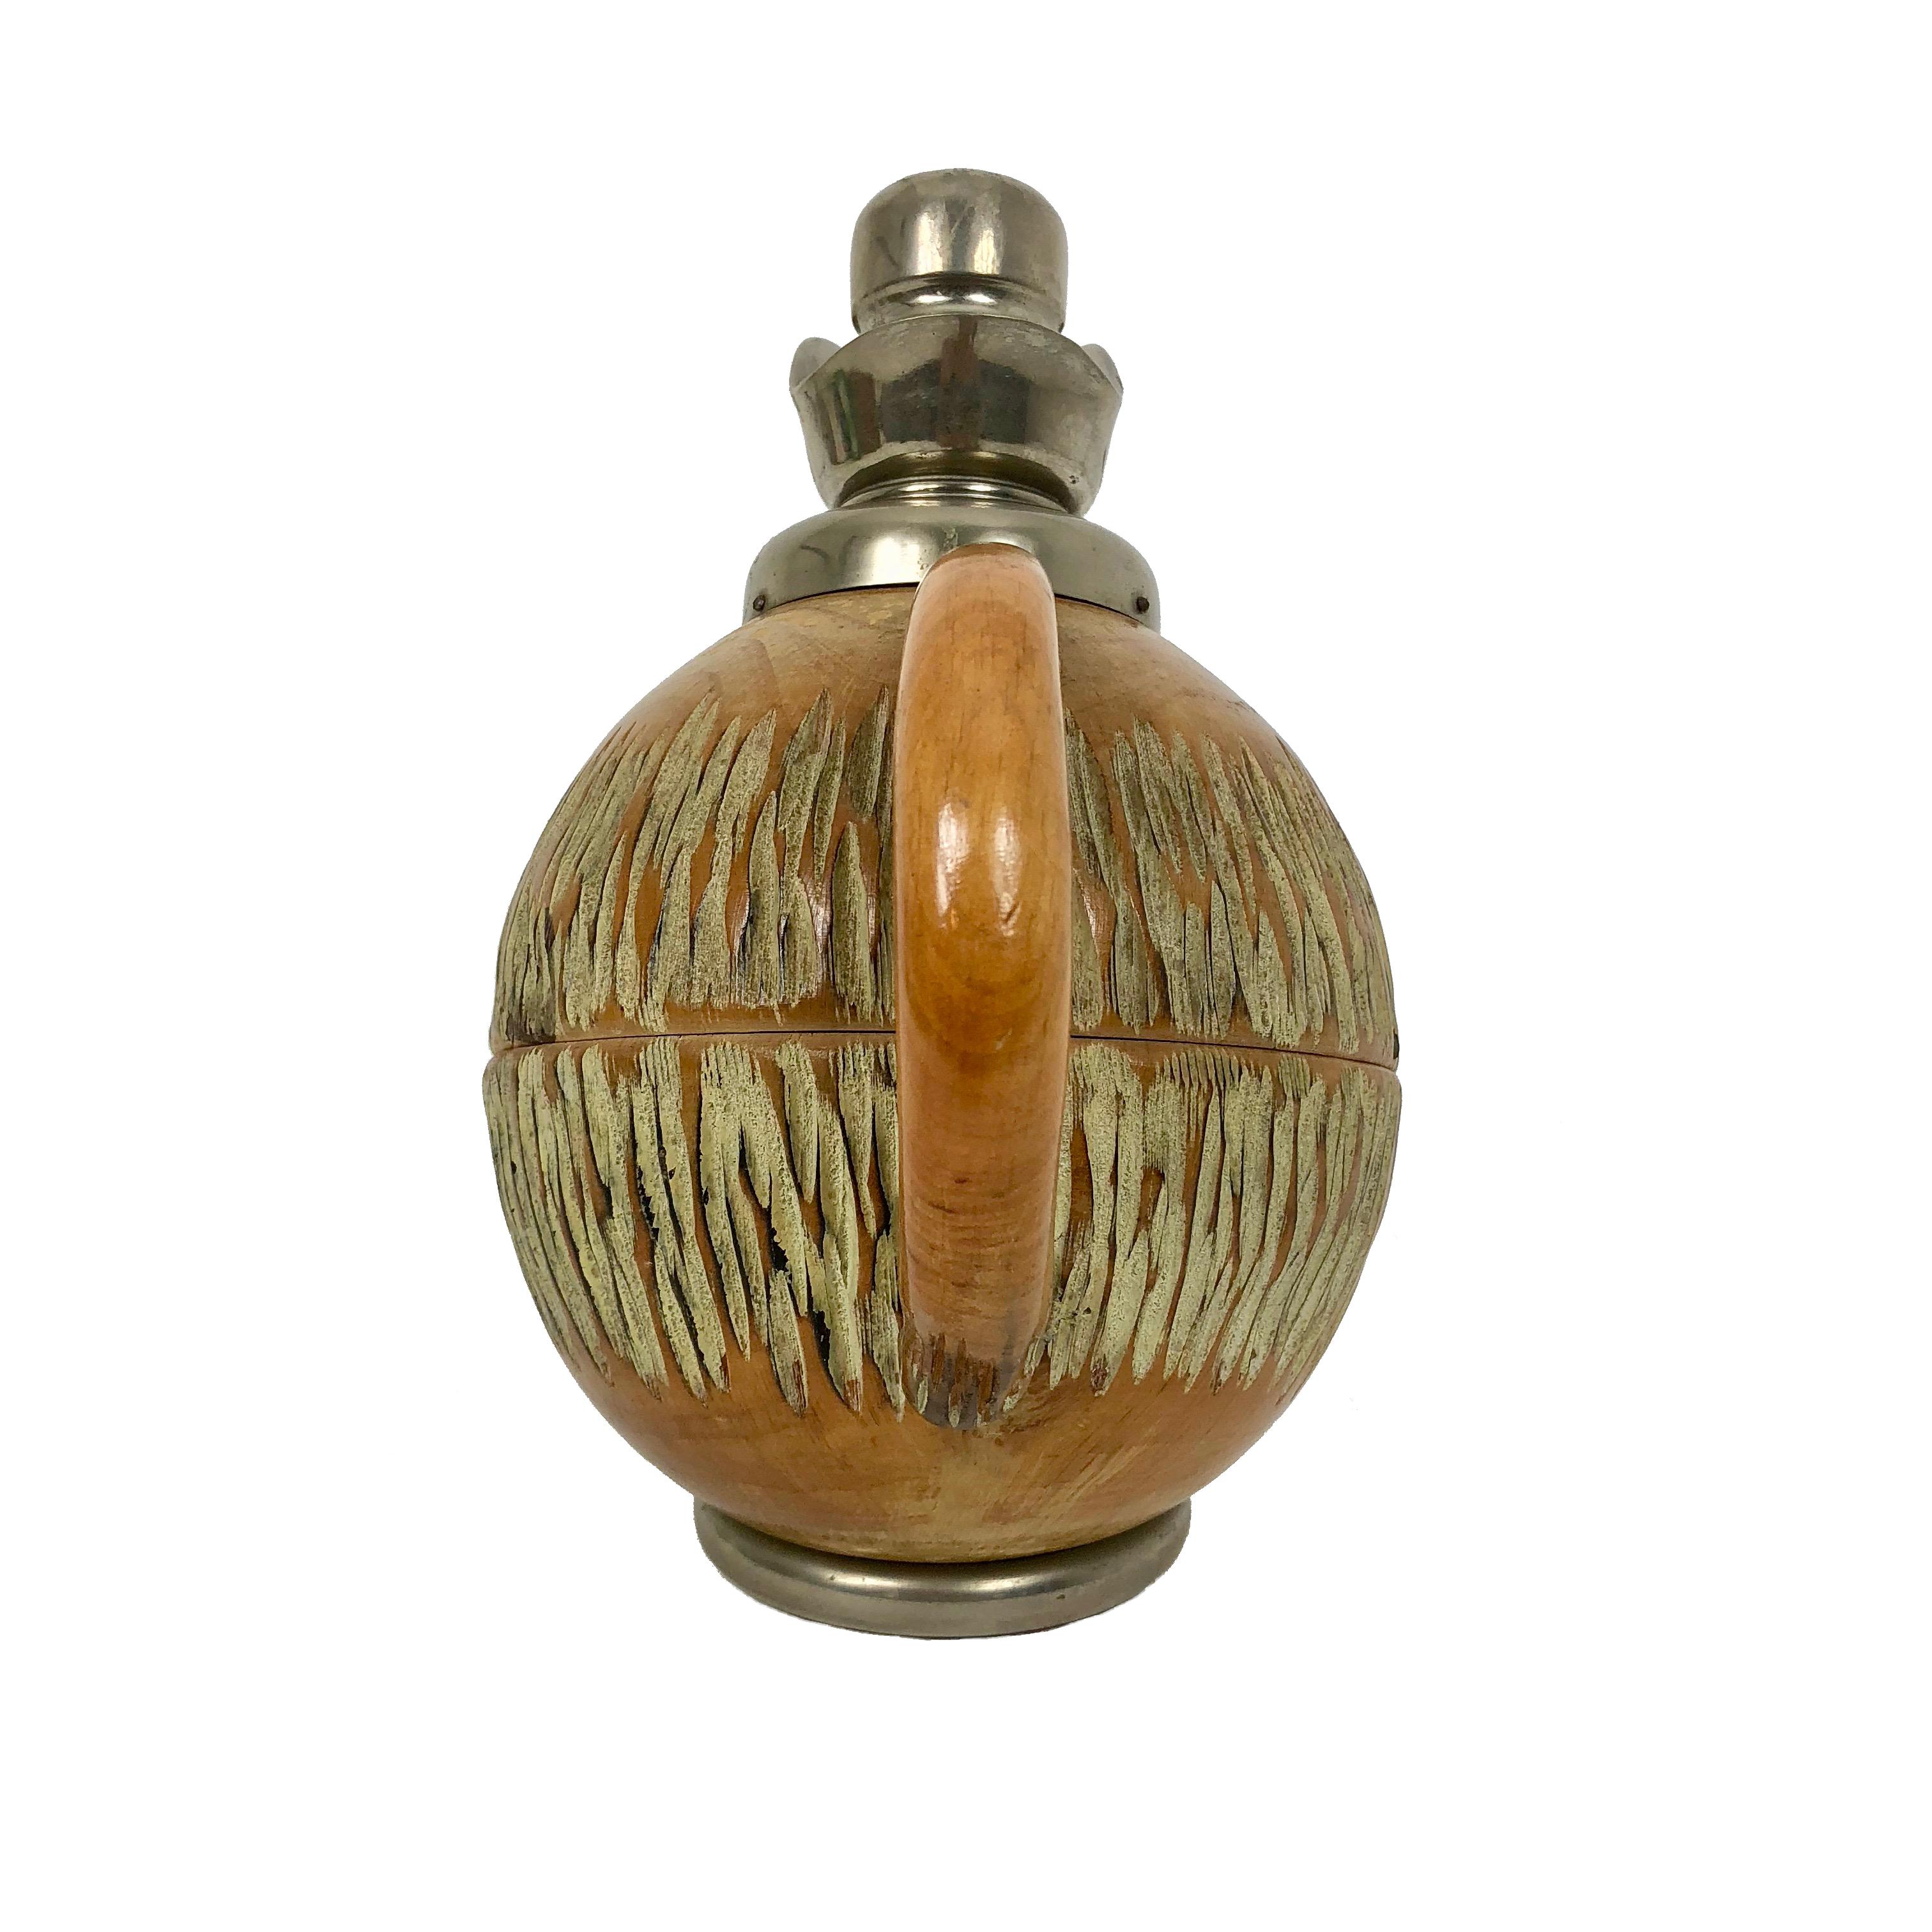 Aldo Tura for Macabo Milano Italy Wood Walnuts Thermos Decanter, 1950s In Good Condition For Sale In Rome, IT